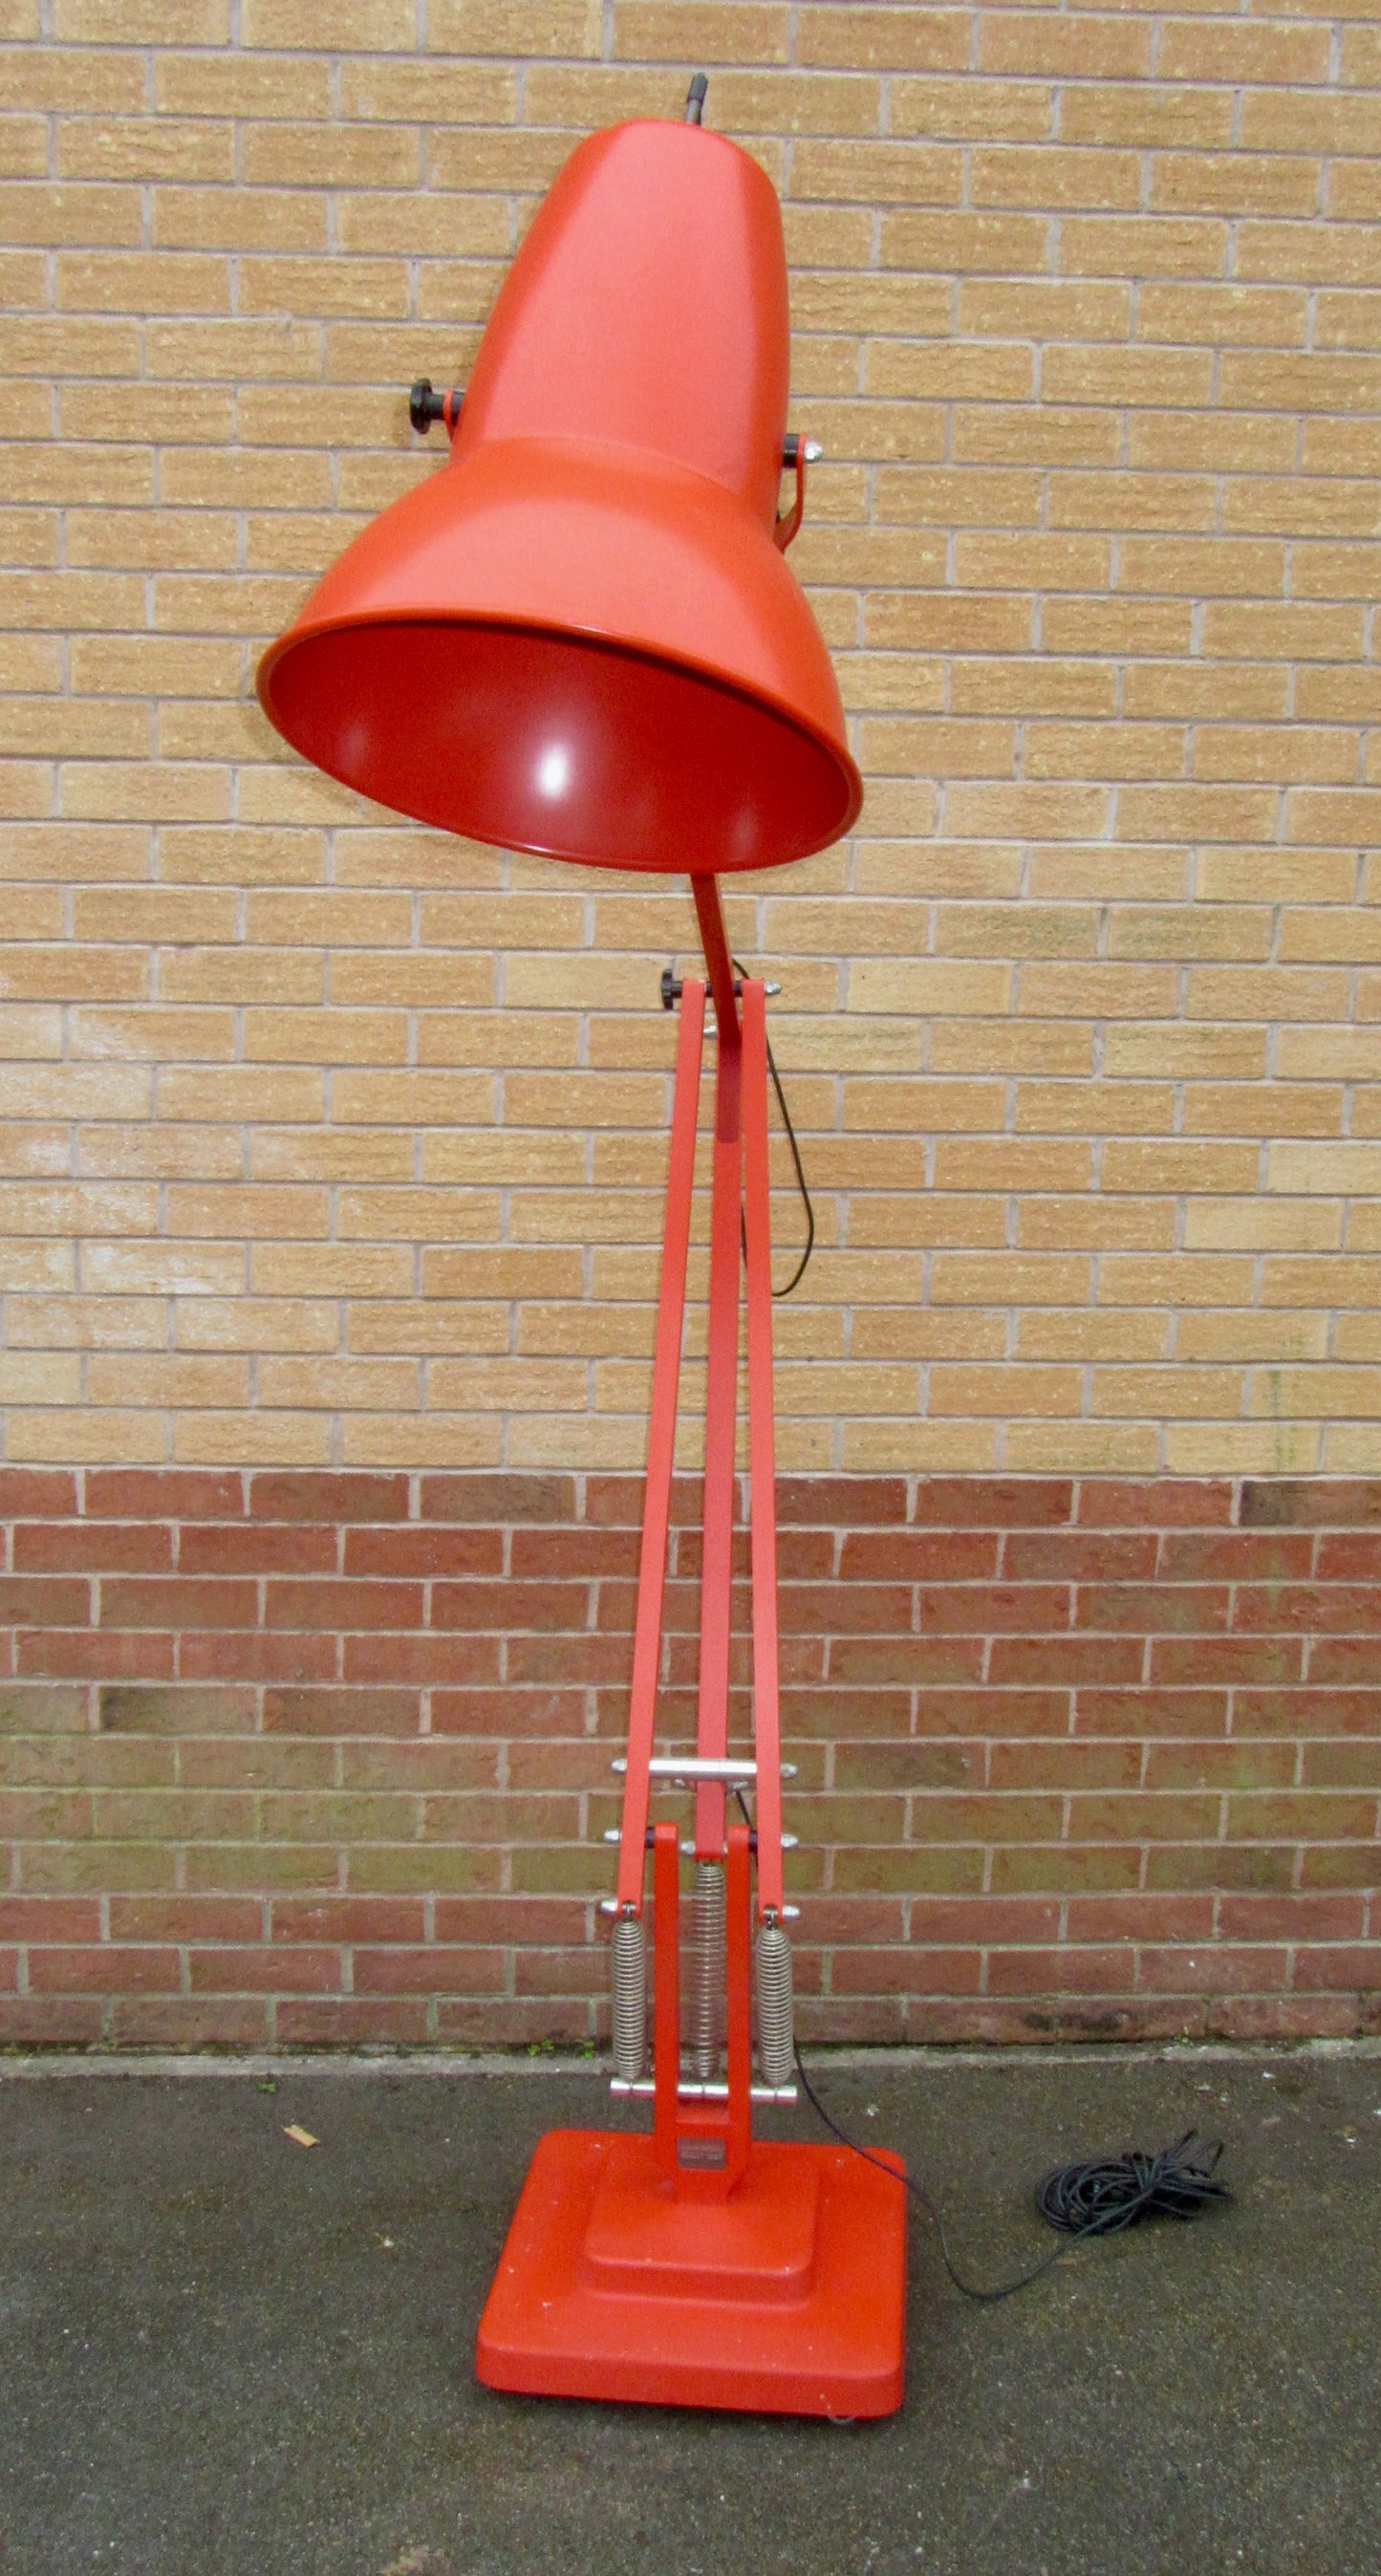 Giant Indoor Anglepoise 1227 Red Floor Lamp With Black Flex